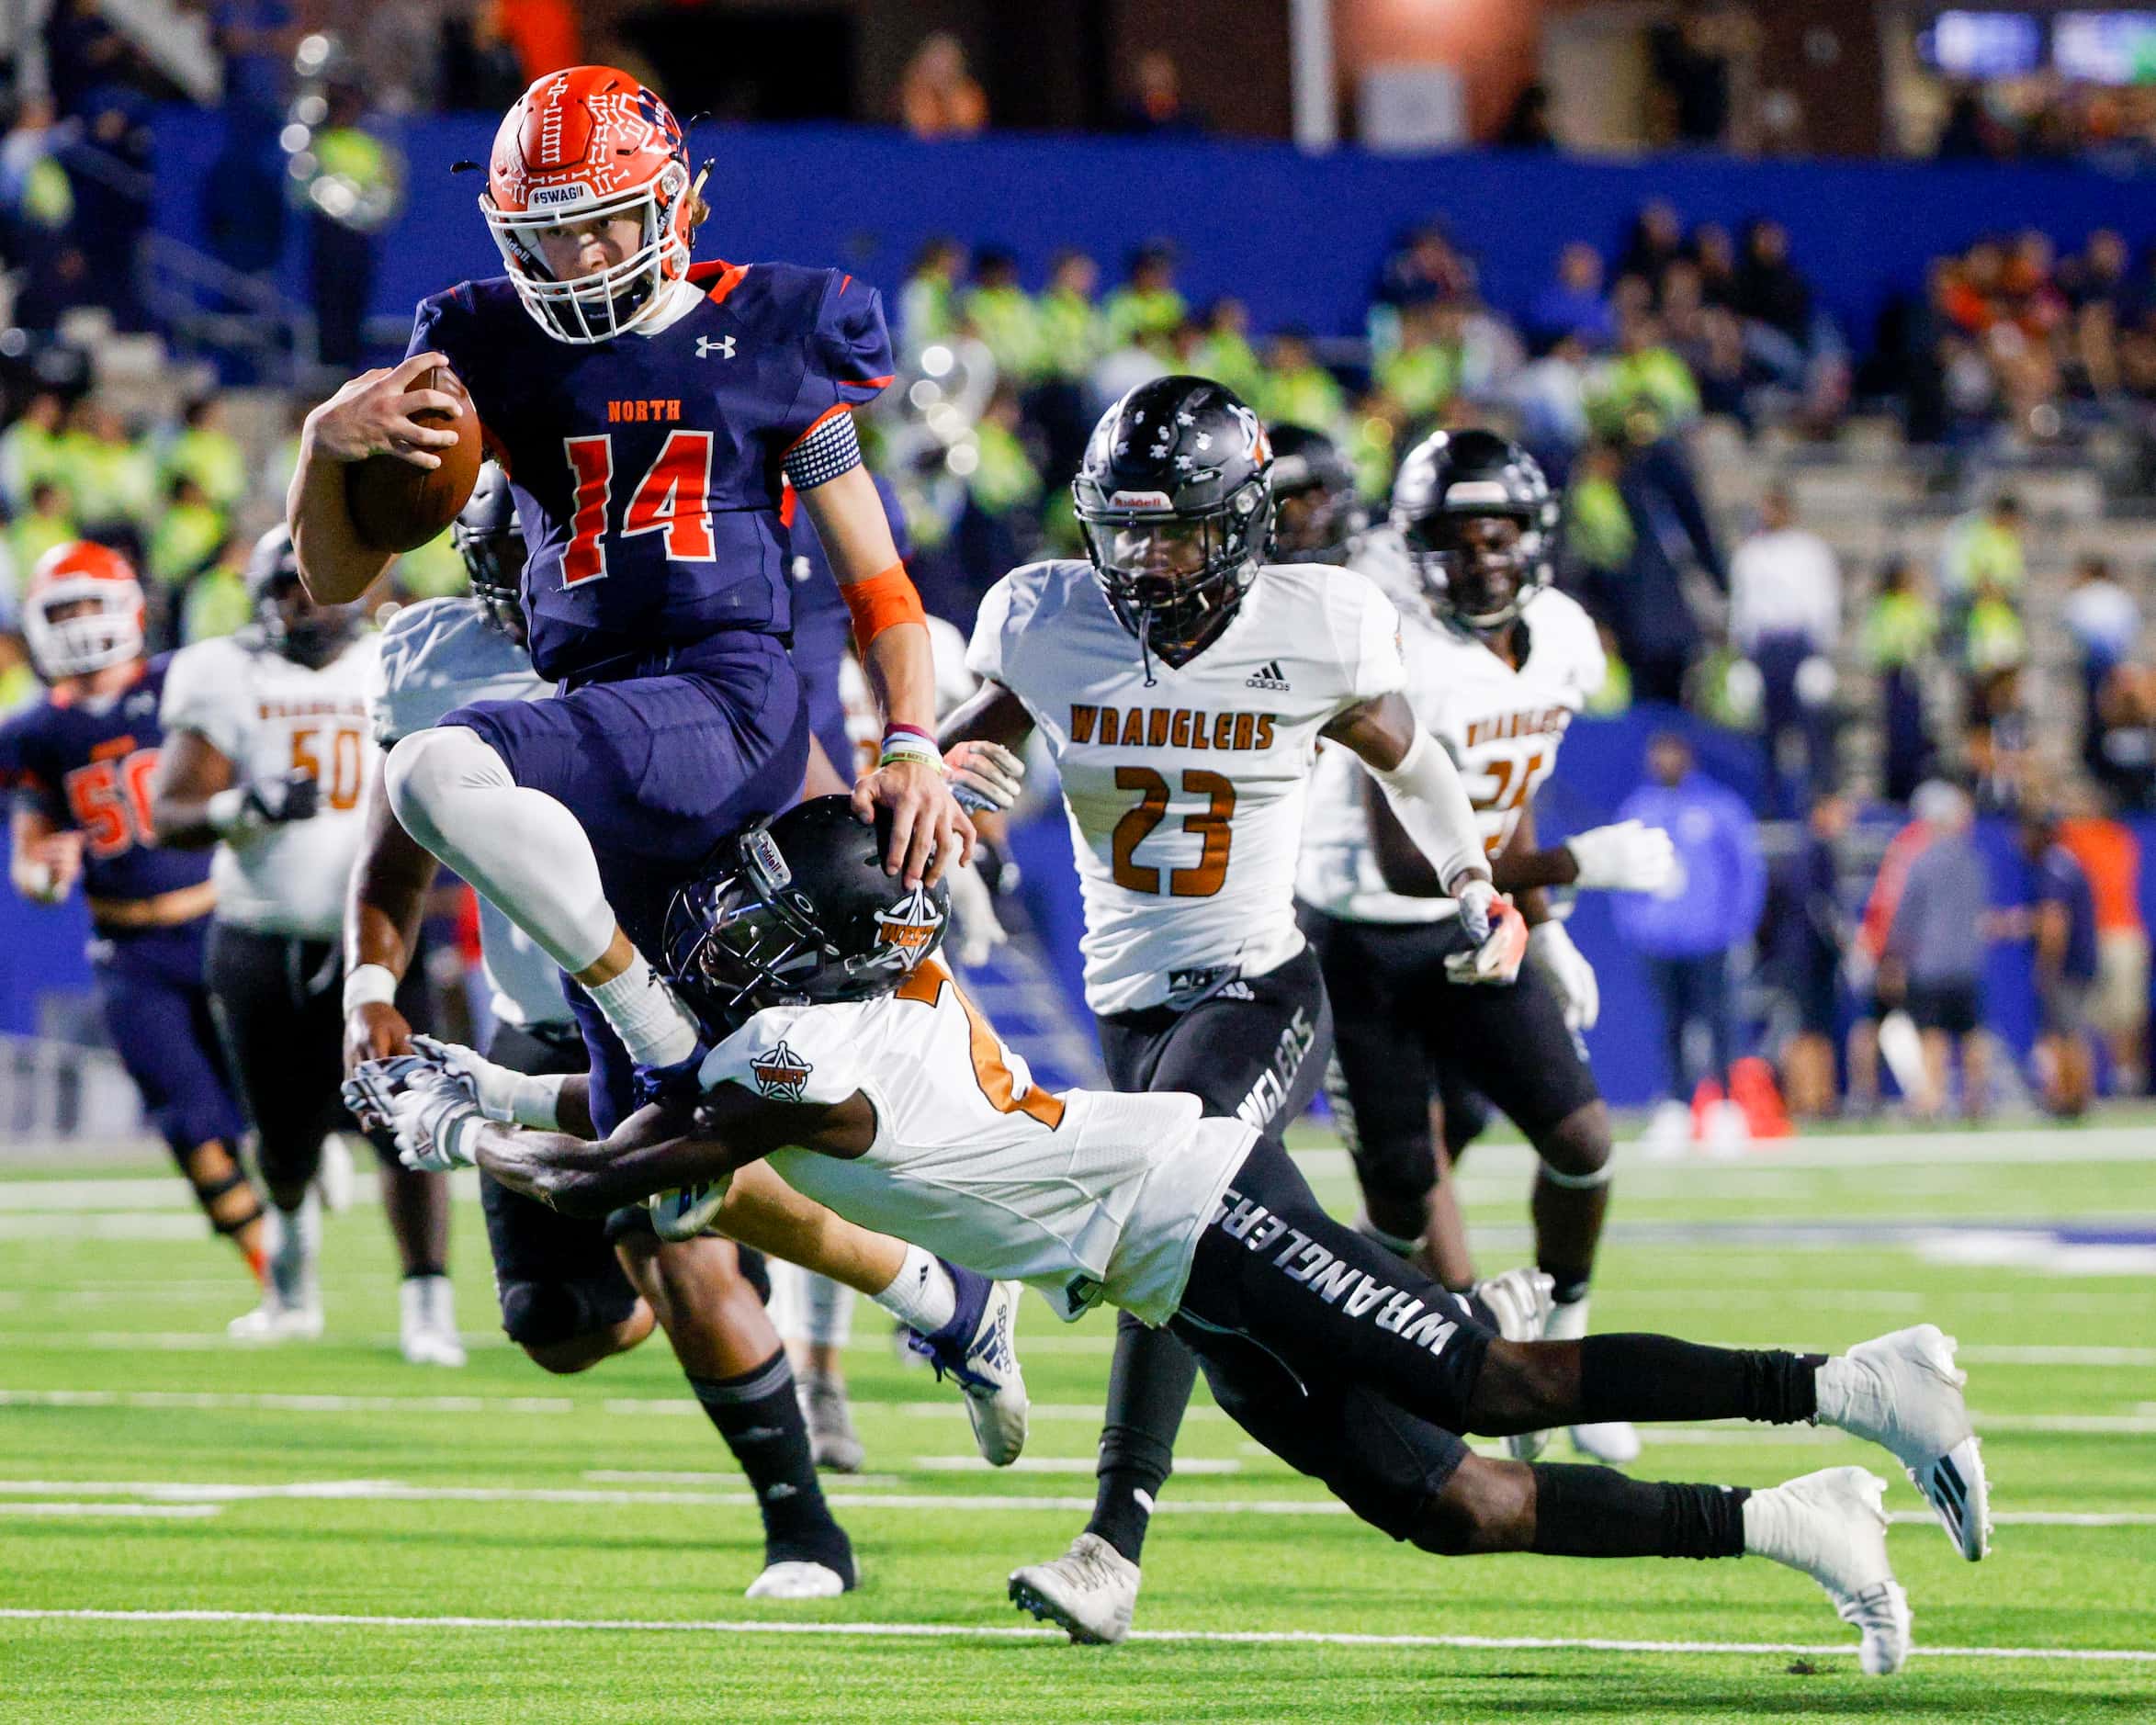 McKinney North quarterback Colin Hitchcock (14) hurdles over the tackle of West Mesquite’s...